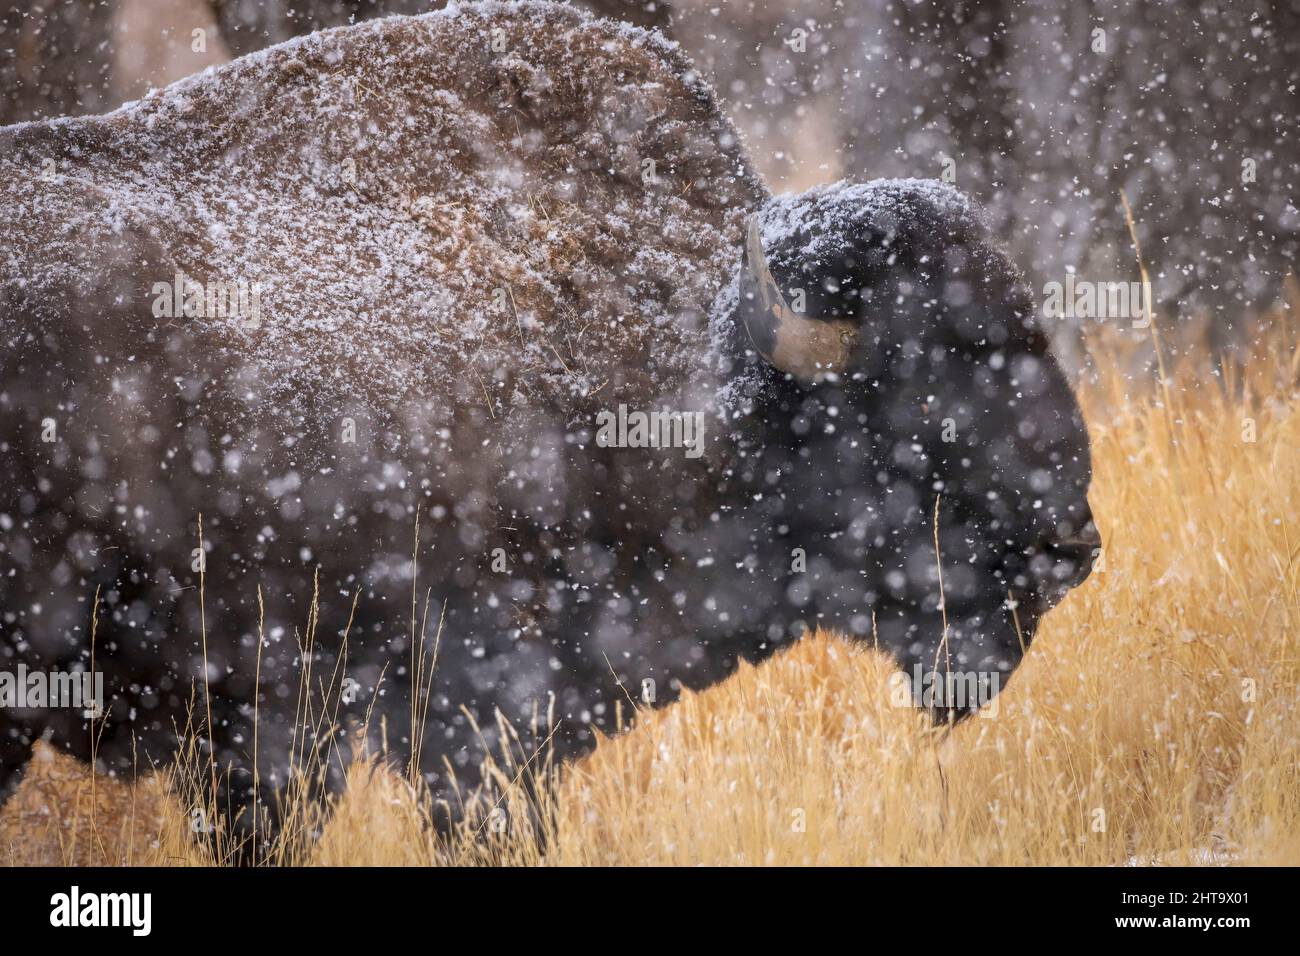 American Bison in snow Stock Photo